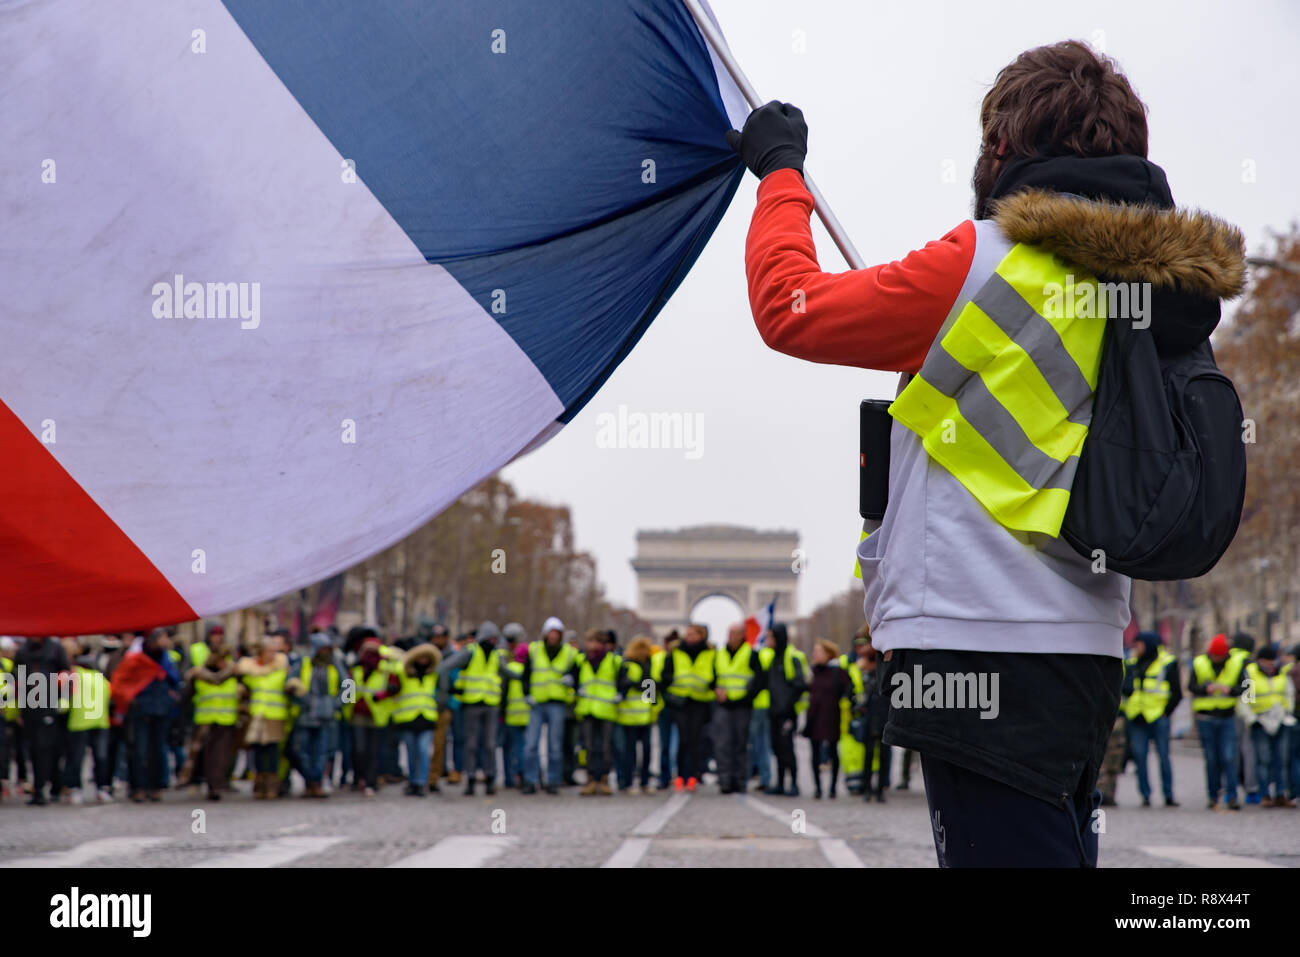 Yellow Vests demonstration (Gilets Jaunes) protesters against fuel tax, government, and President Macron with flag at Champs-Élysées, Paris, France Stock Photo